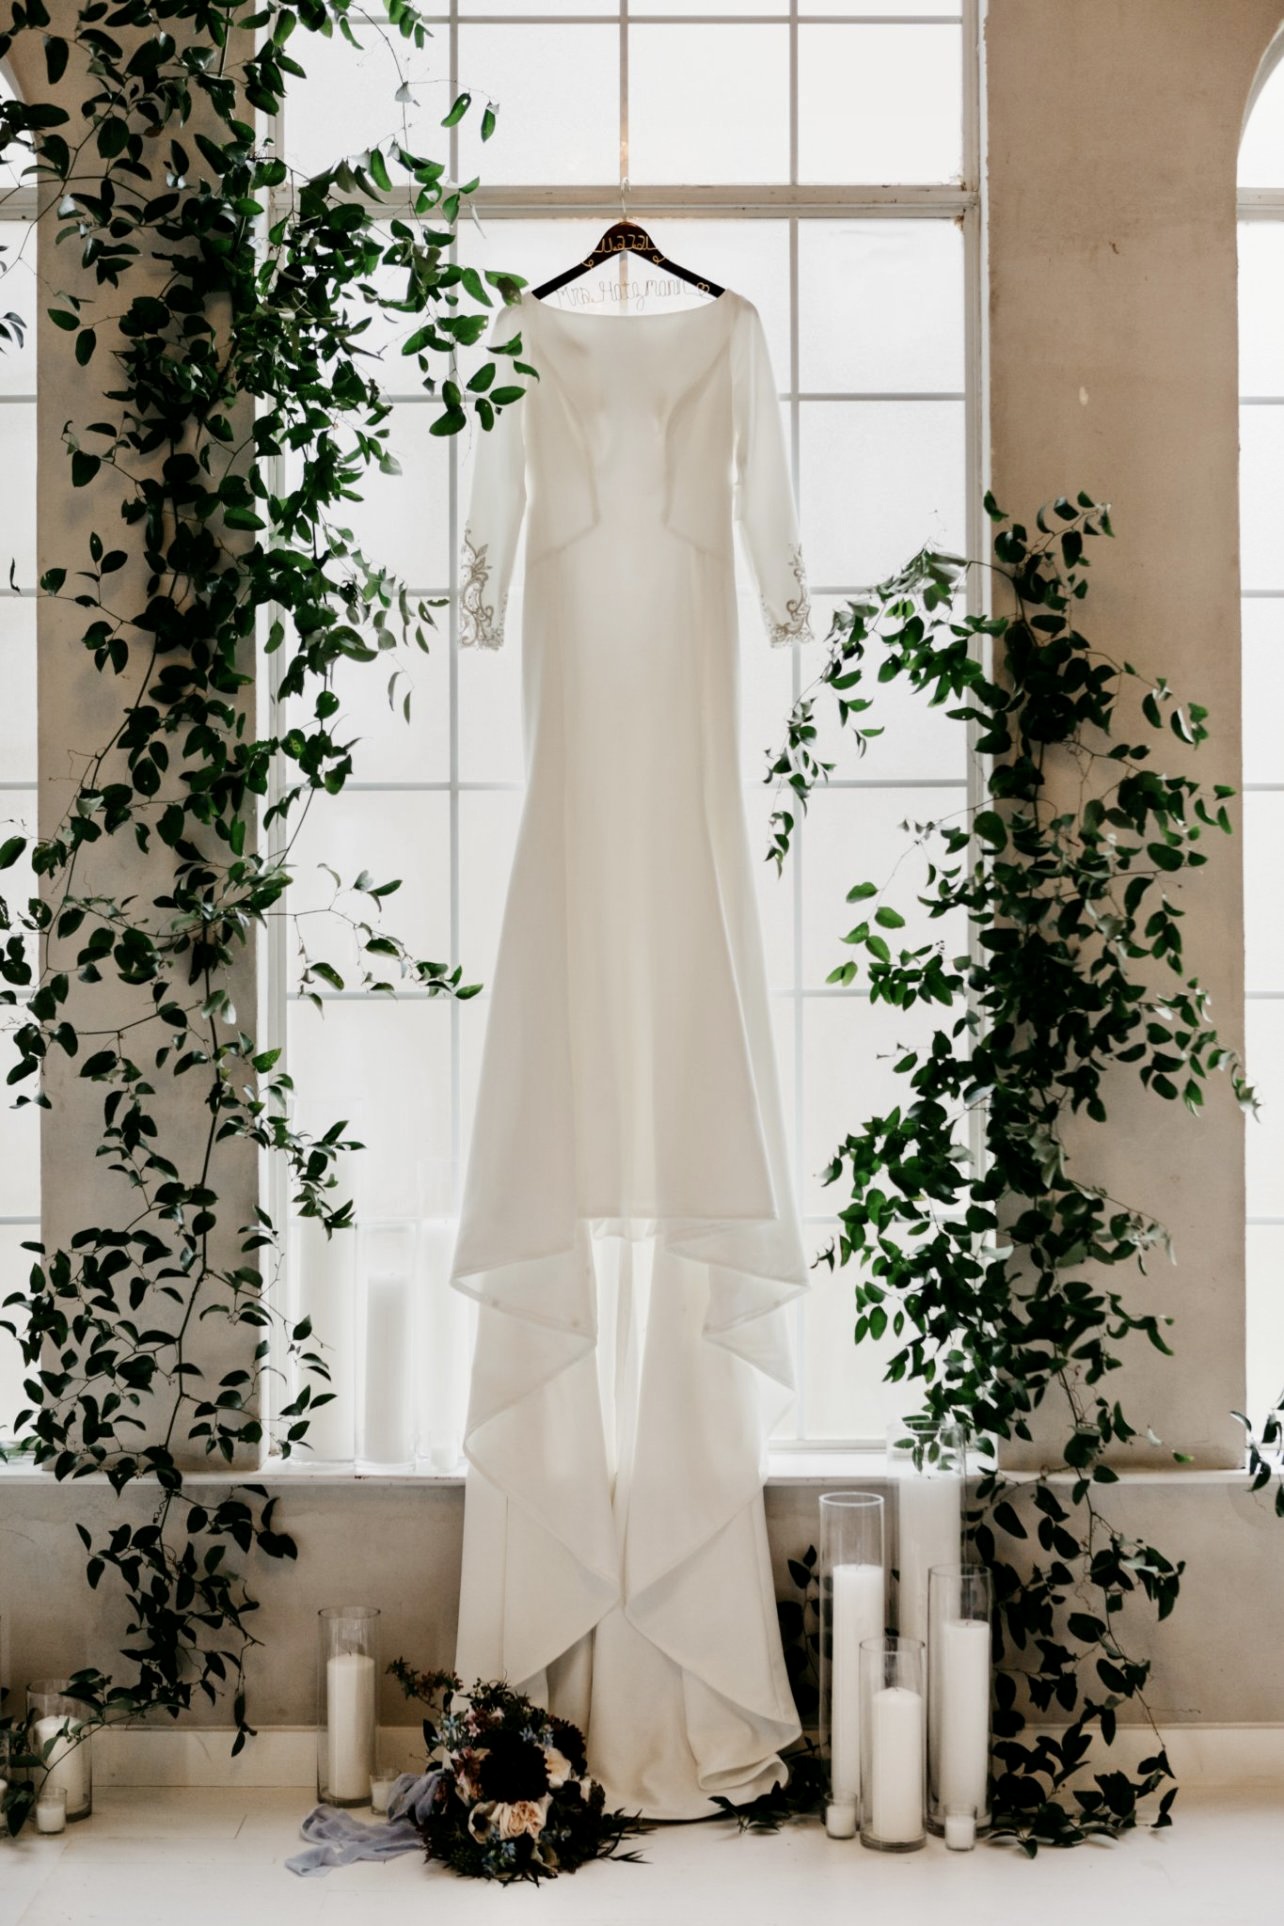 Bride Wearing Unique Simple Wedding Dress With Pearl Pins Called Aston By Sottero And Midgley